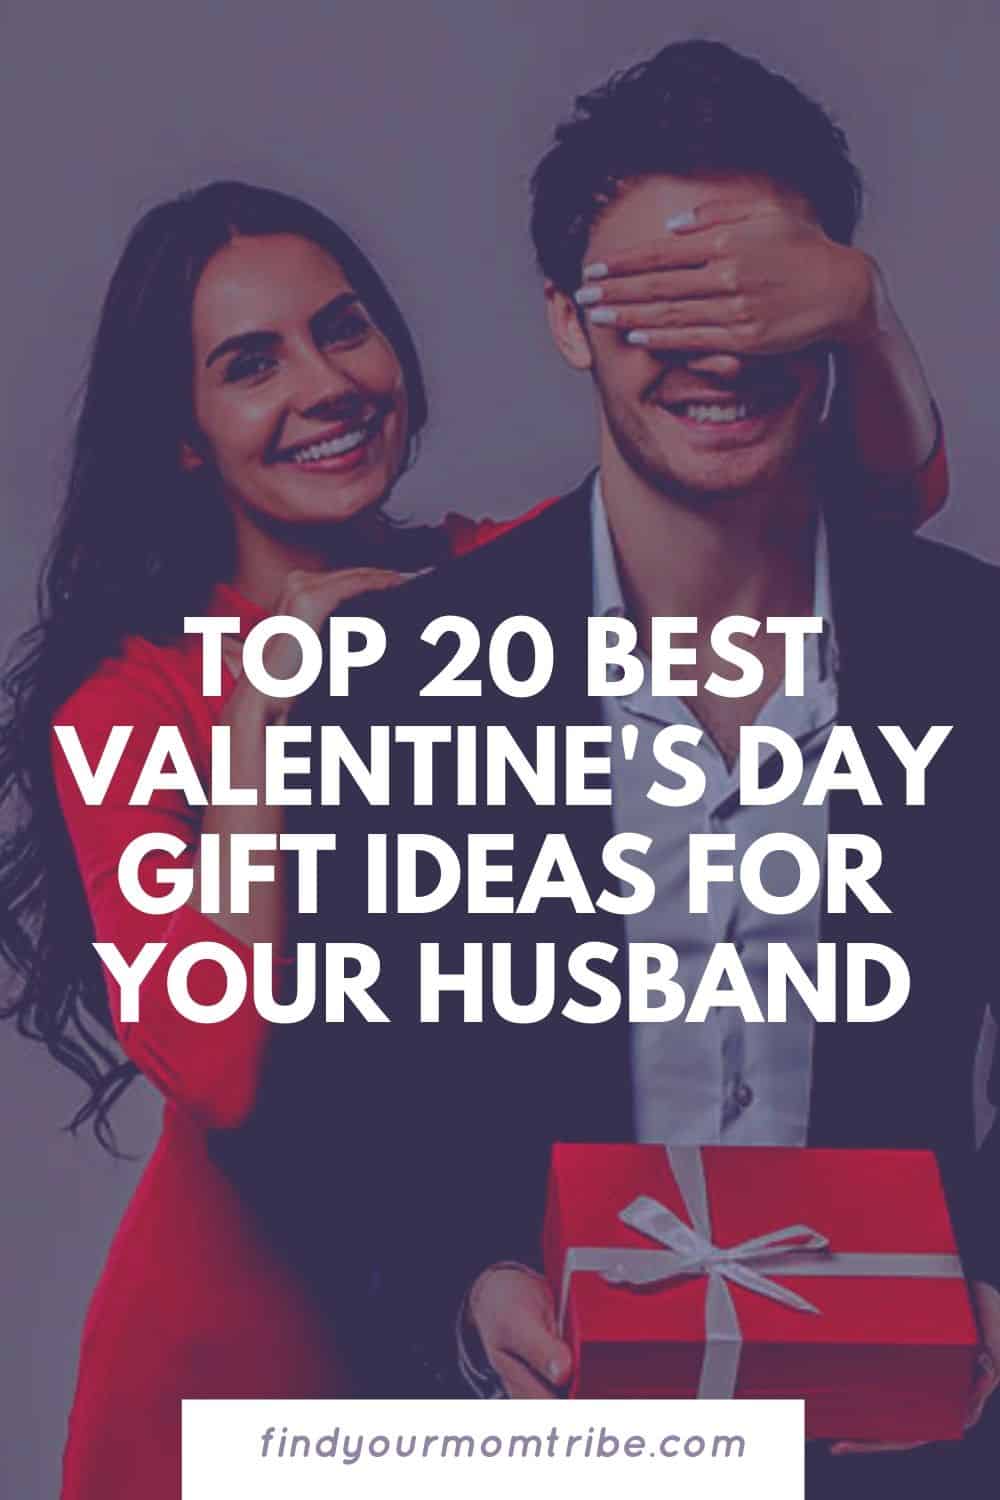 Top 20 Best Valentine's Day Gift Ideas For Your Husband